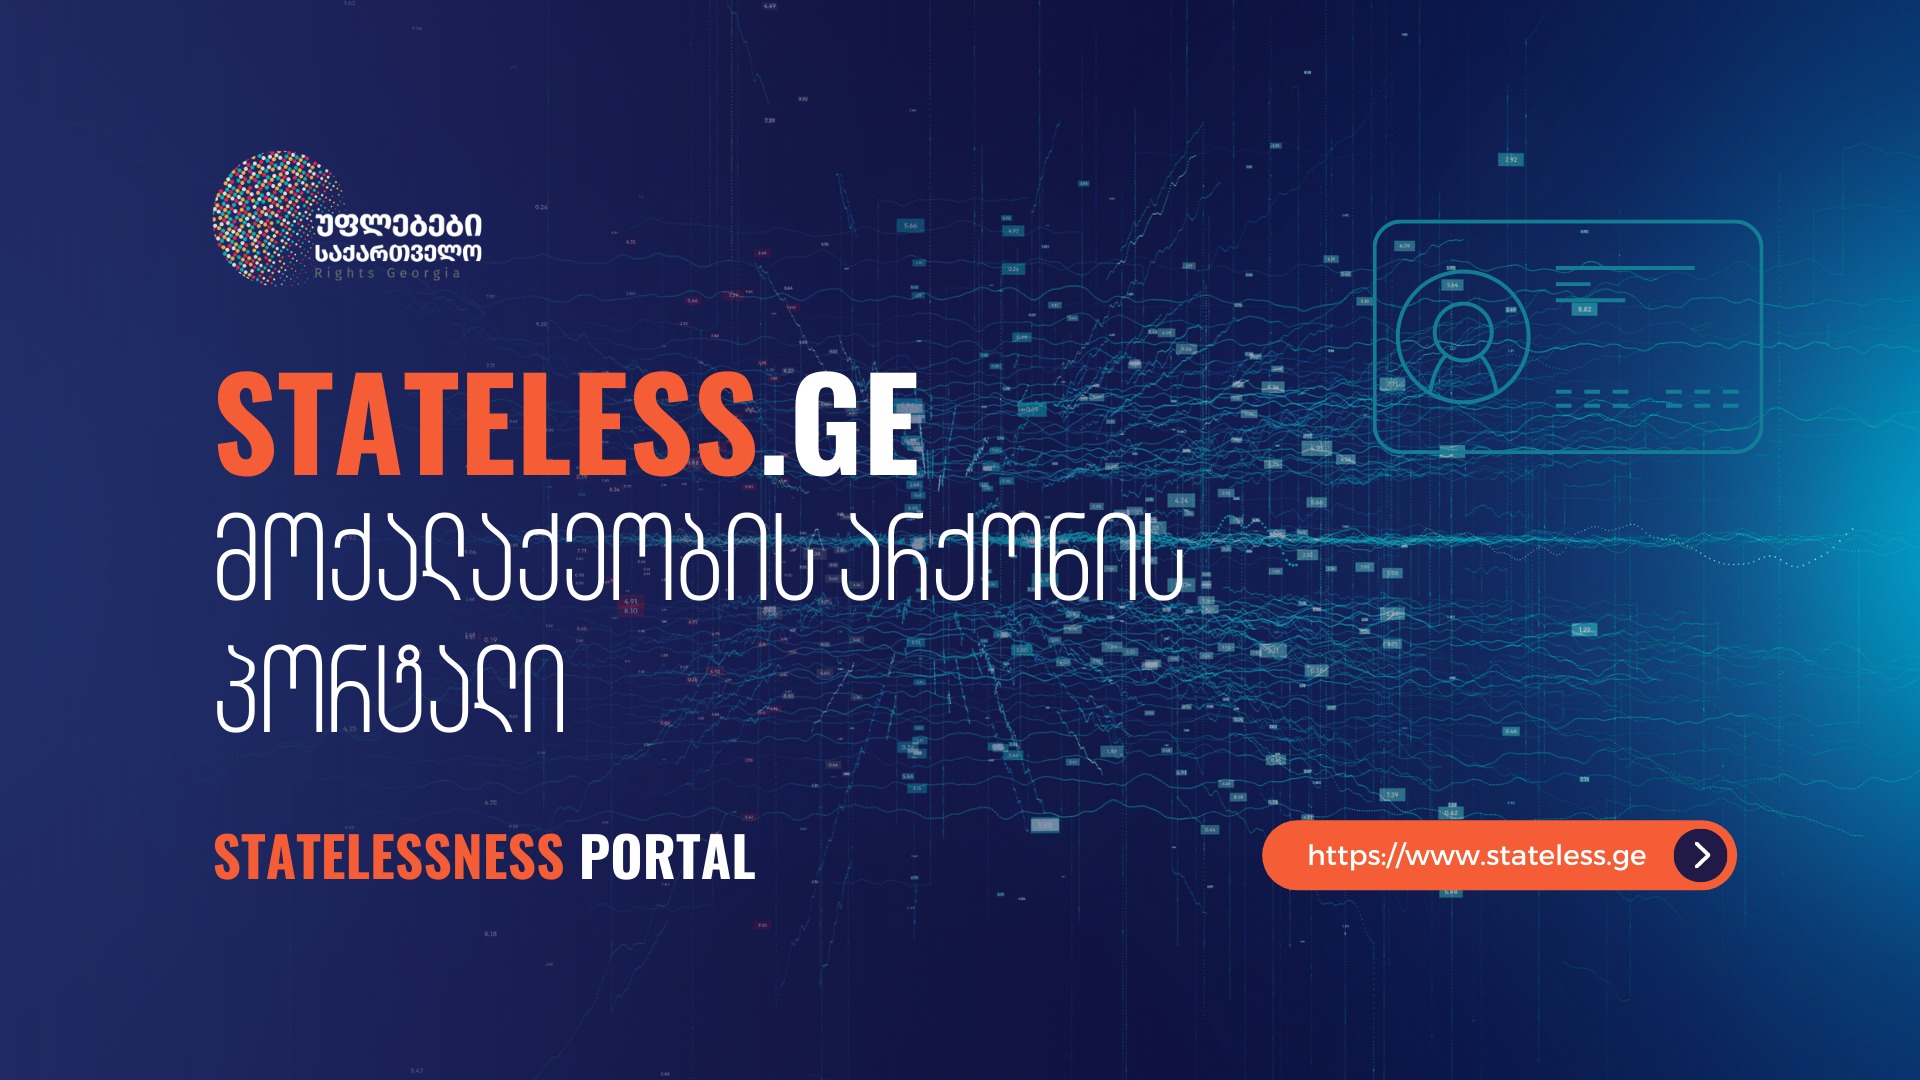 “Rights Georgia” has launched Stateless.ge, a new Statelessness Portal